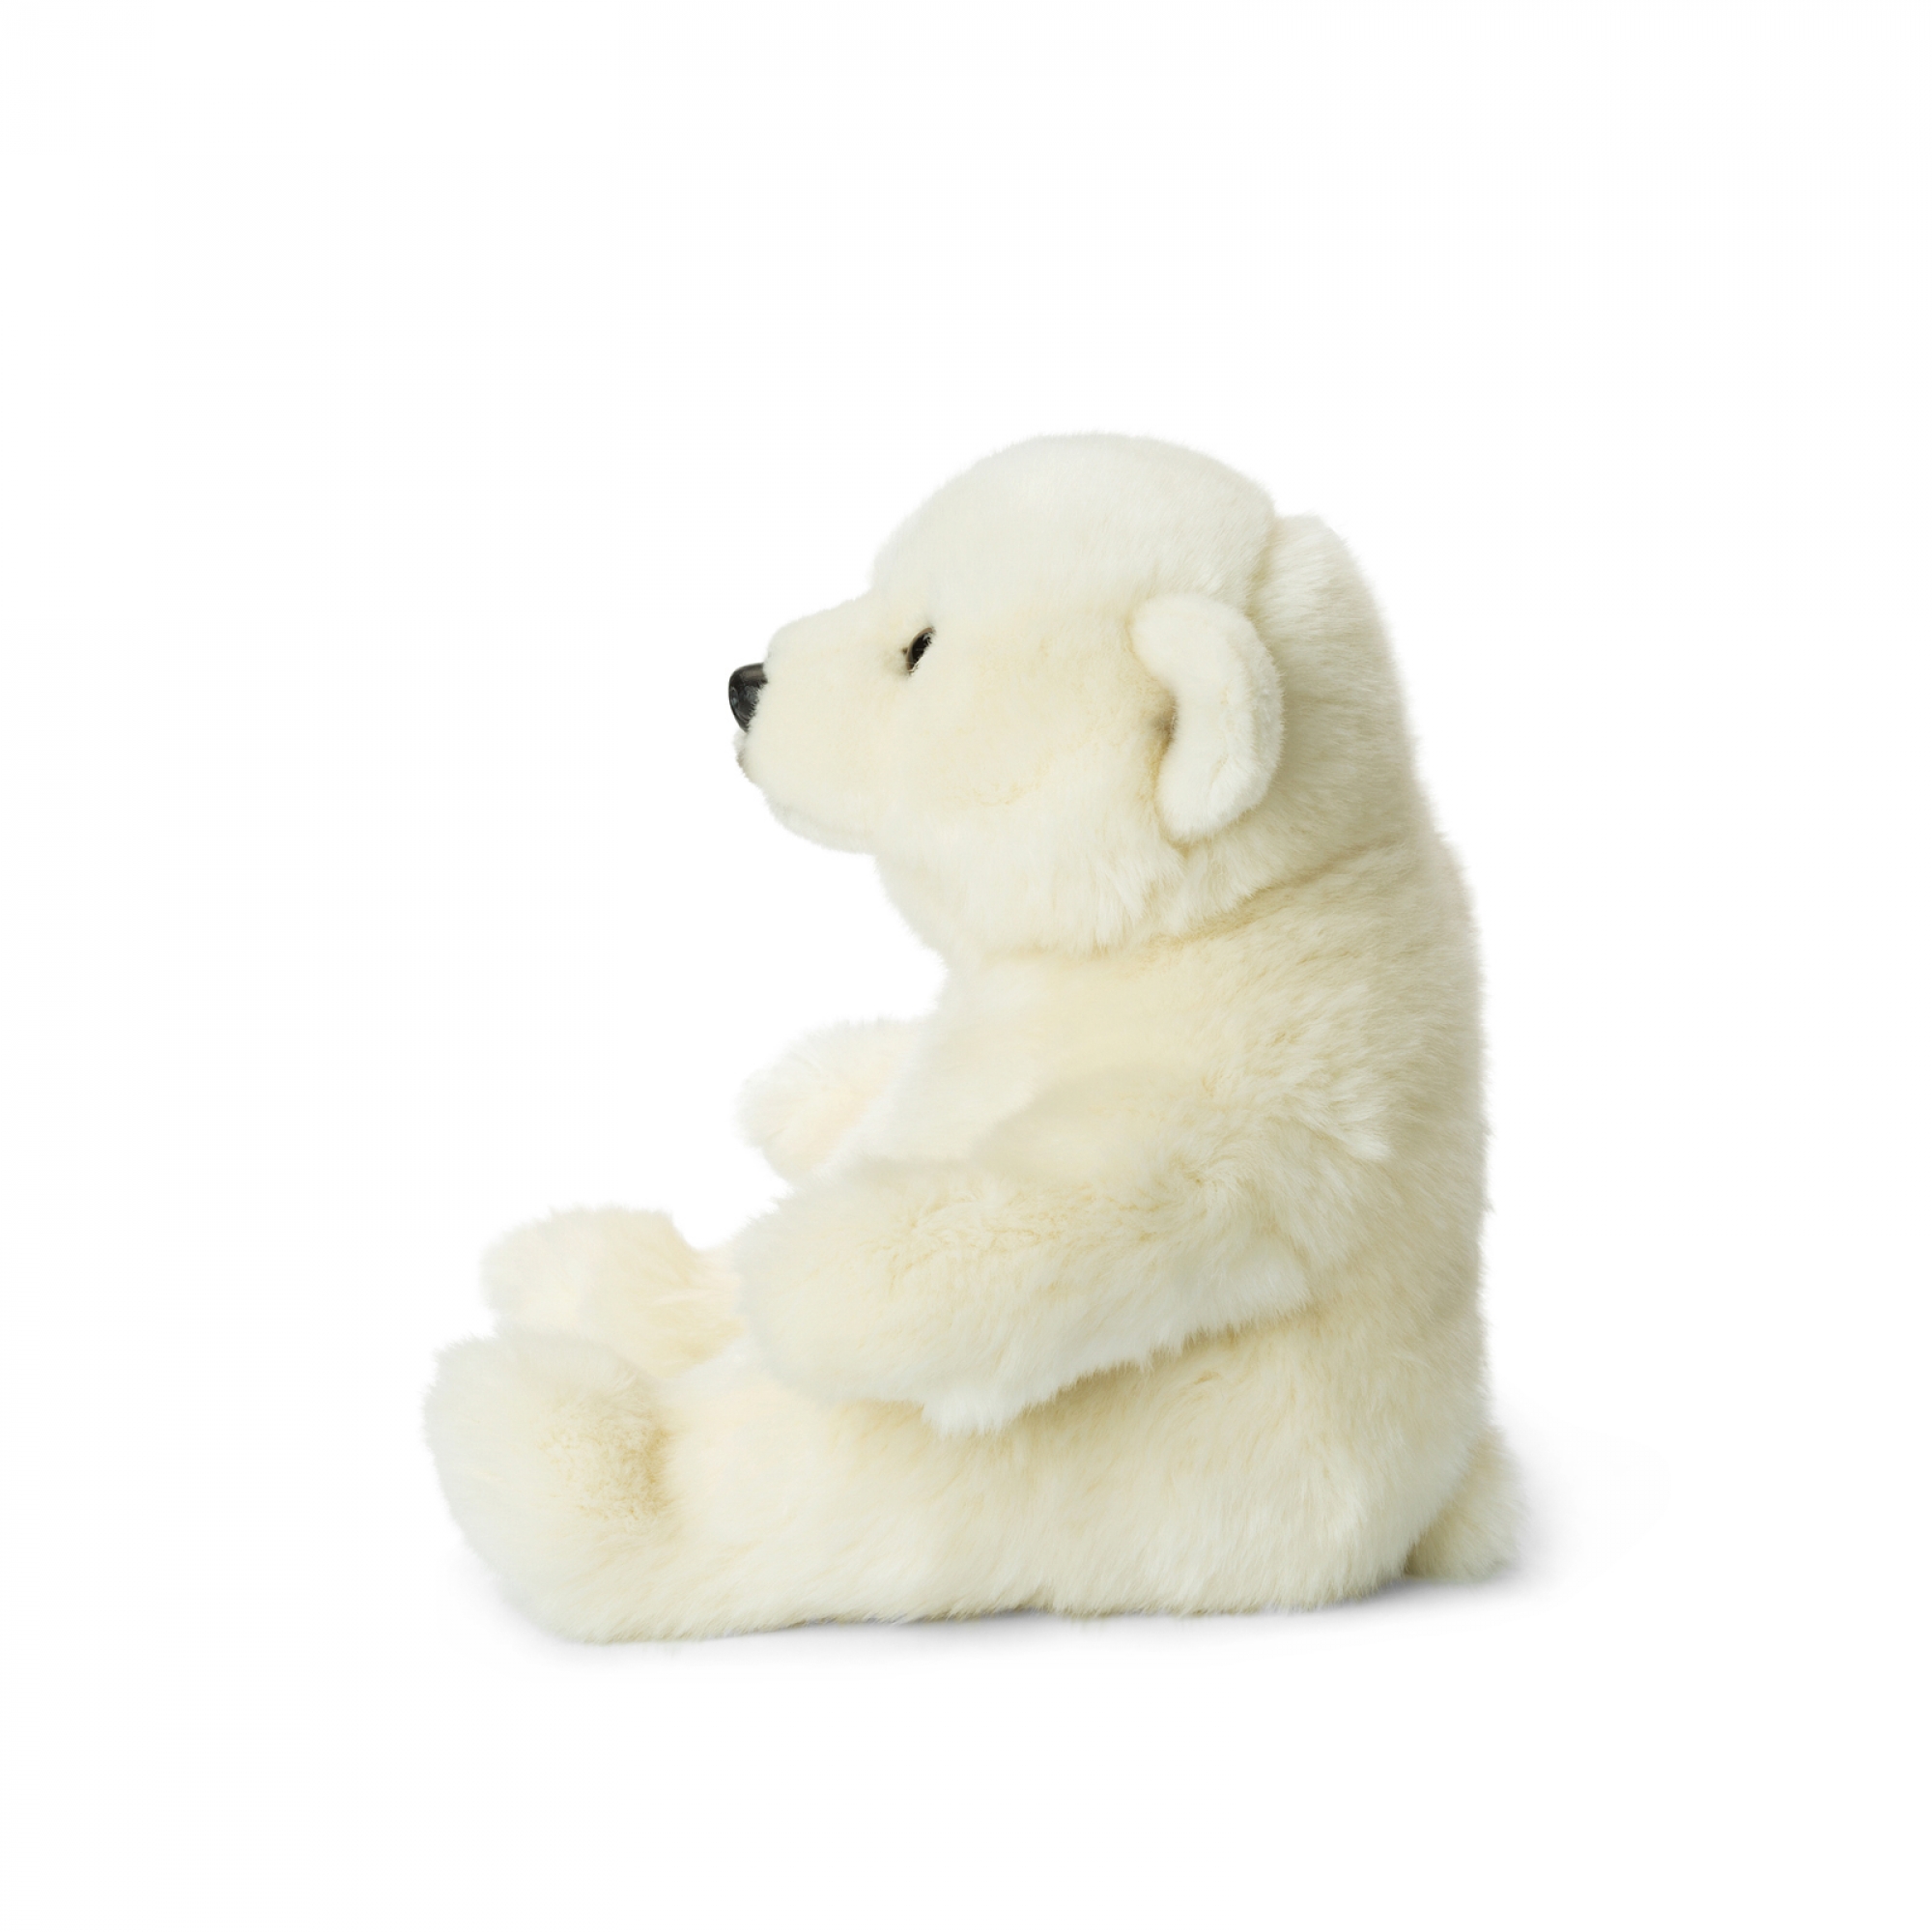 PELUCHE OURS POLAIRE ASSIS - 100 CM